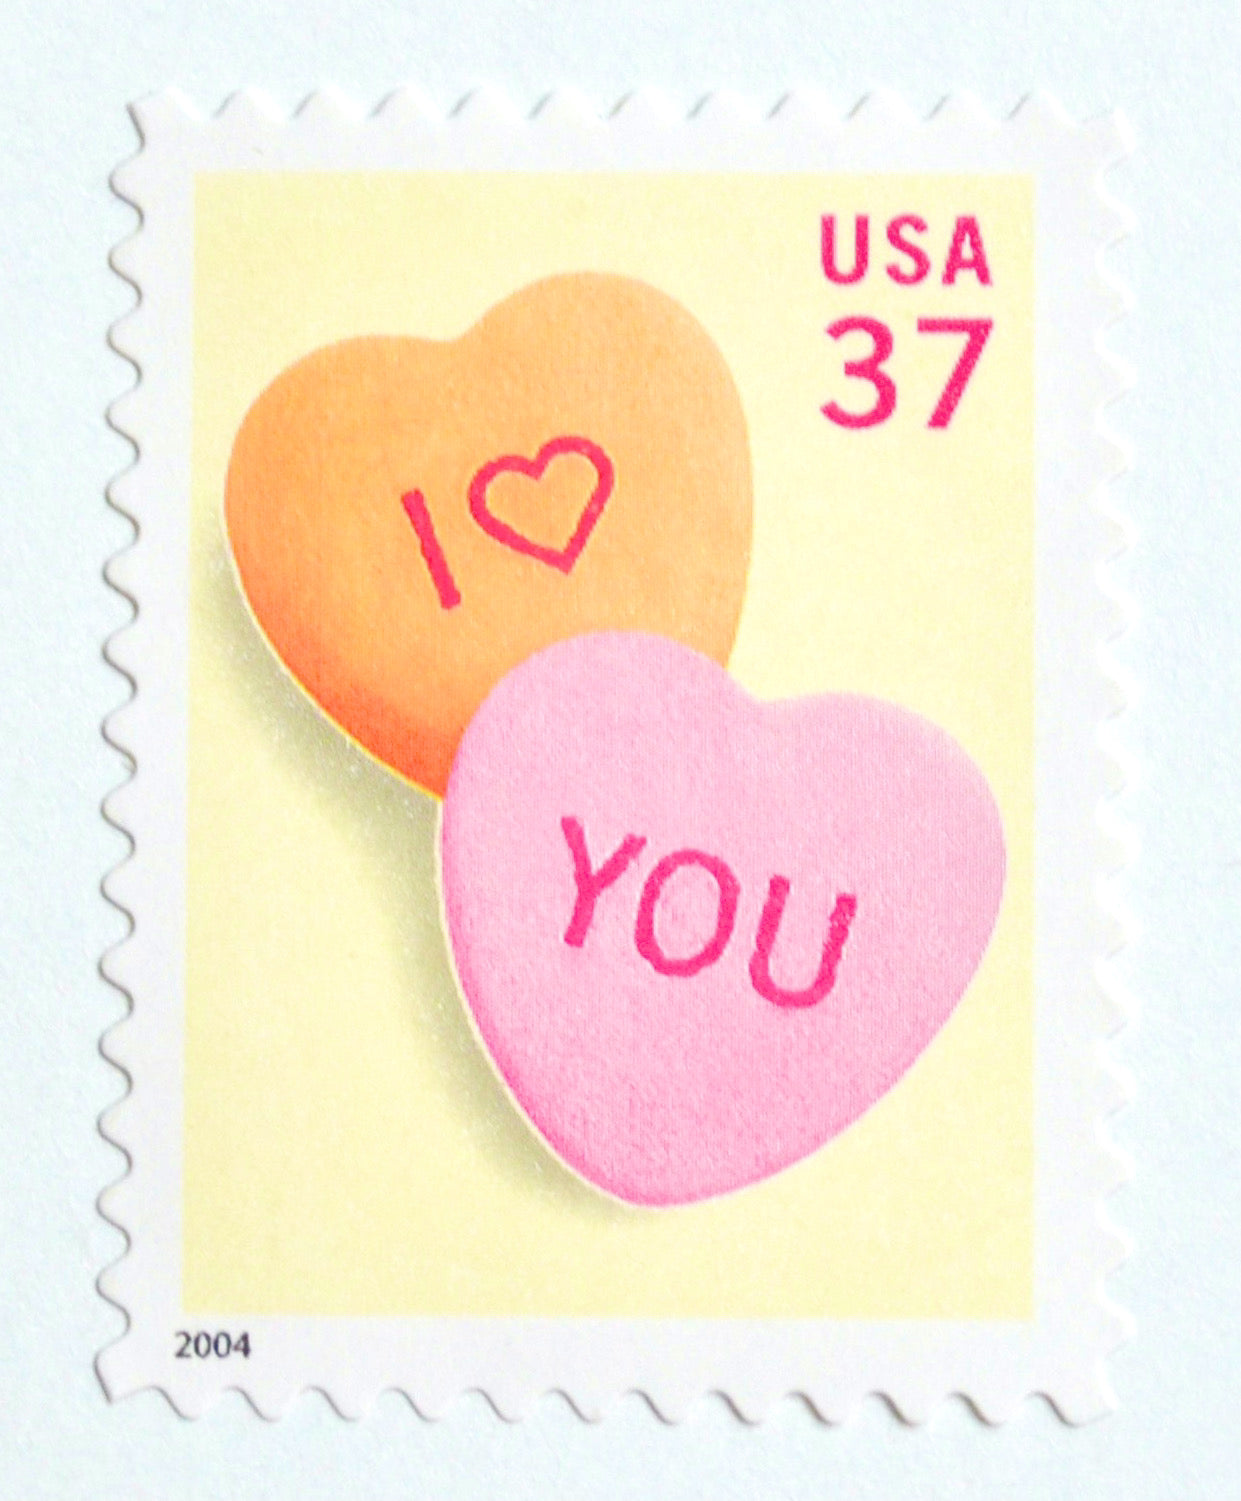 10 Candy Hearts Stamps Sweethearts Vintage Postage Stamps for Mailing –  Edelweiss Post